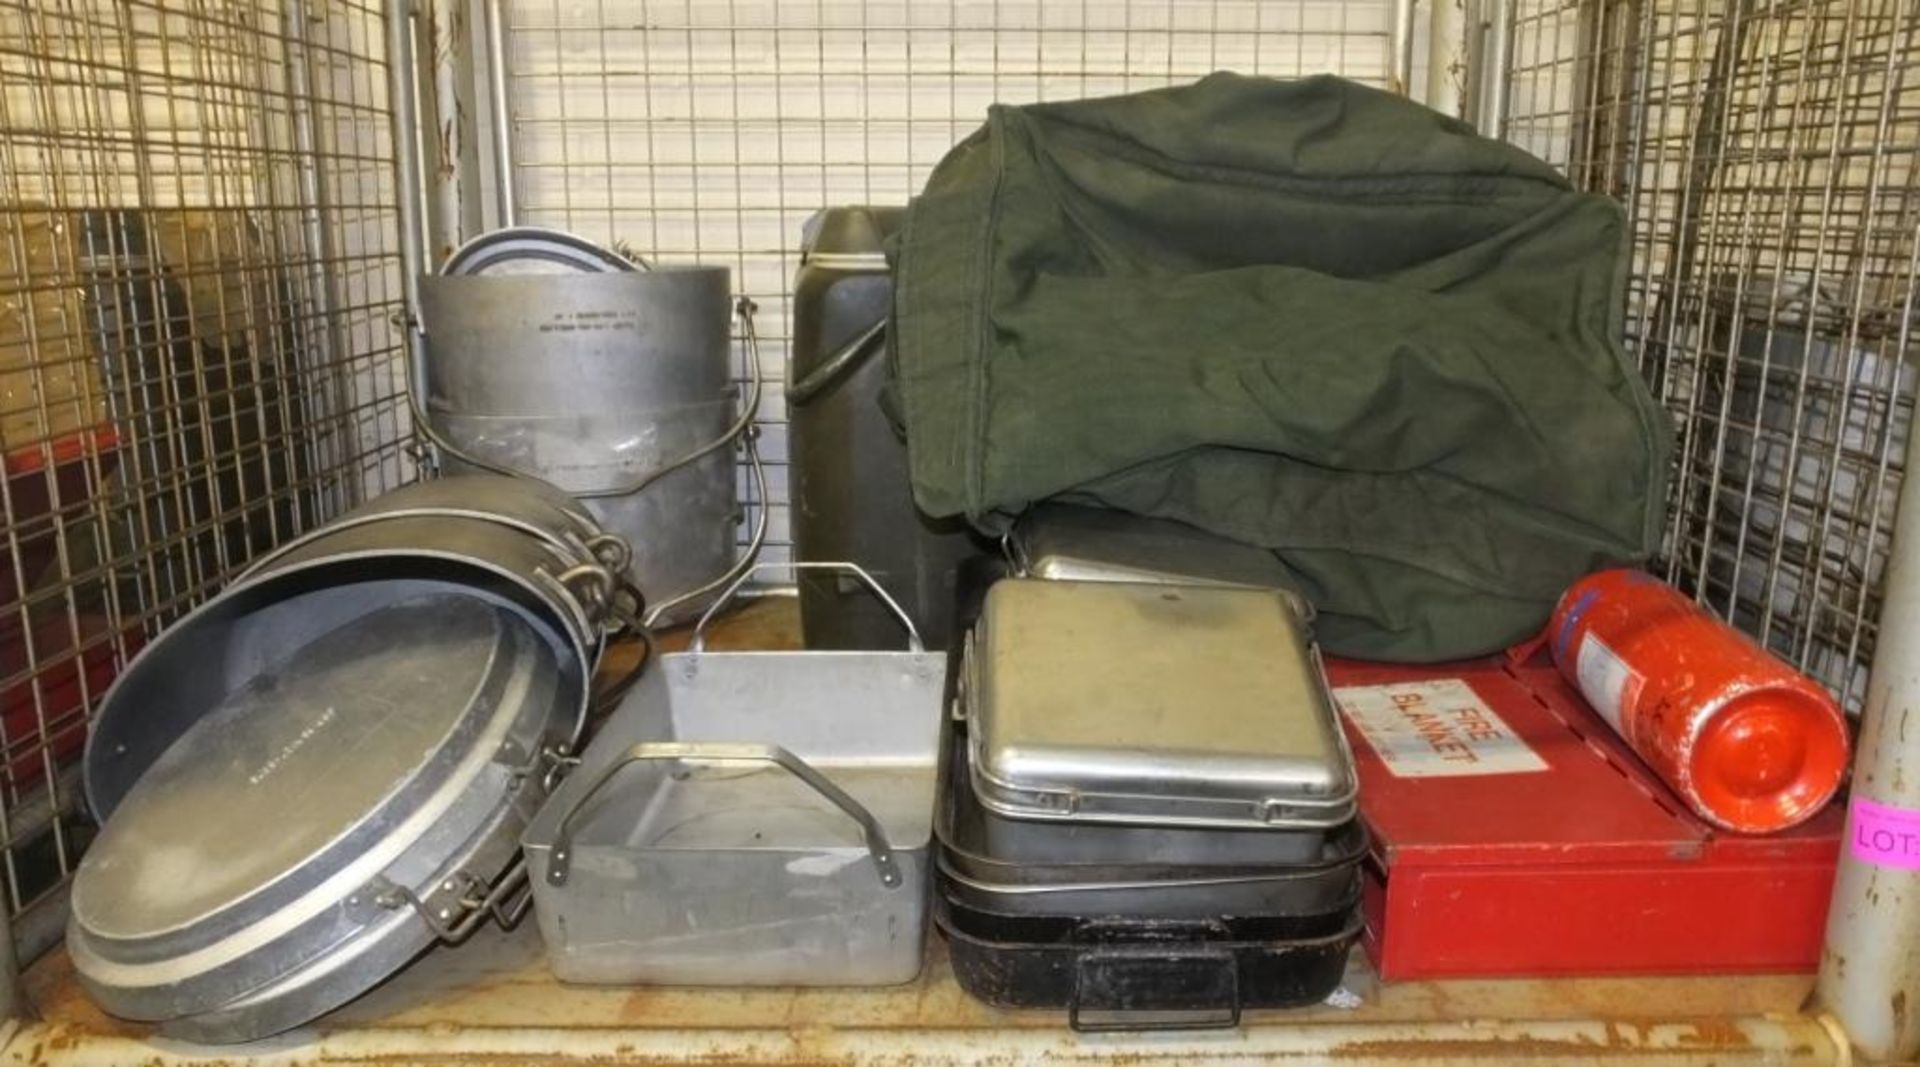 Field Kitchen set - cooker, oven, sieve set in carry box, norweigen food boxes - Image 2 of 4